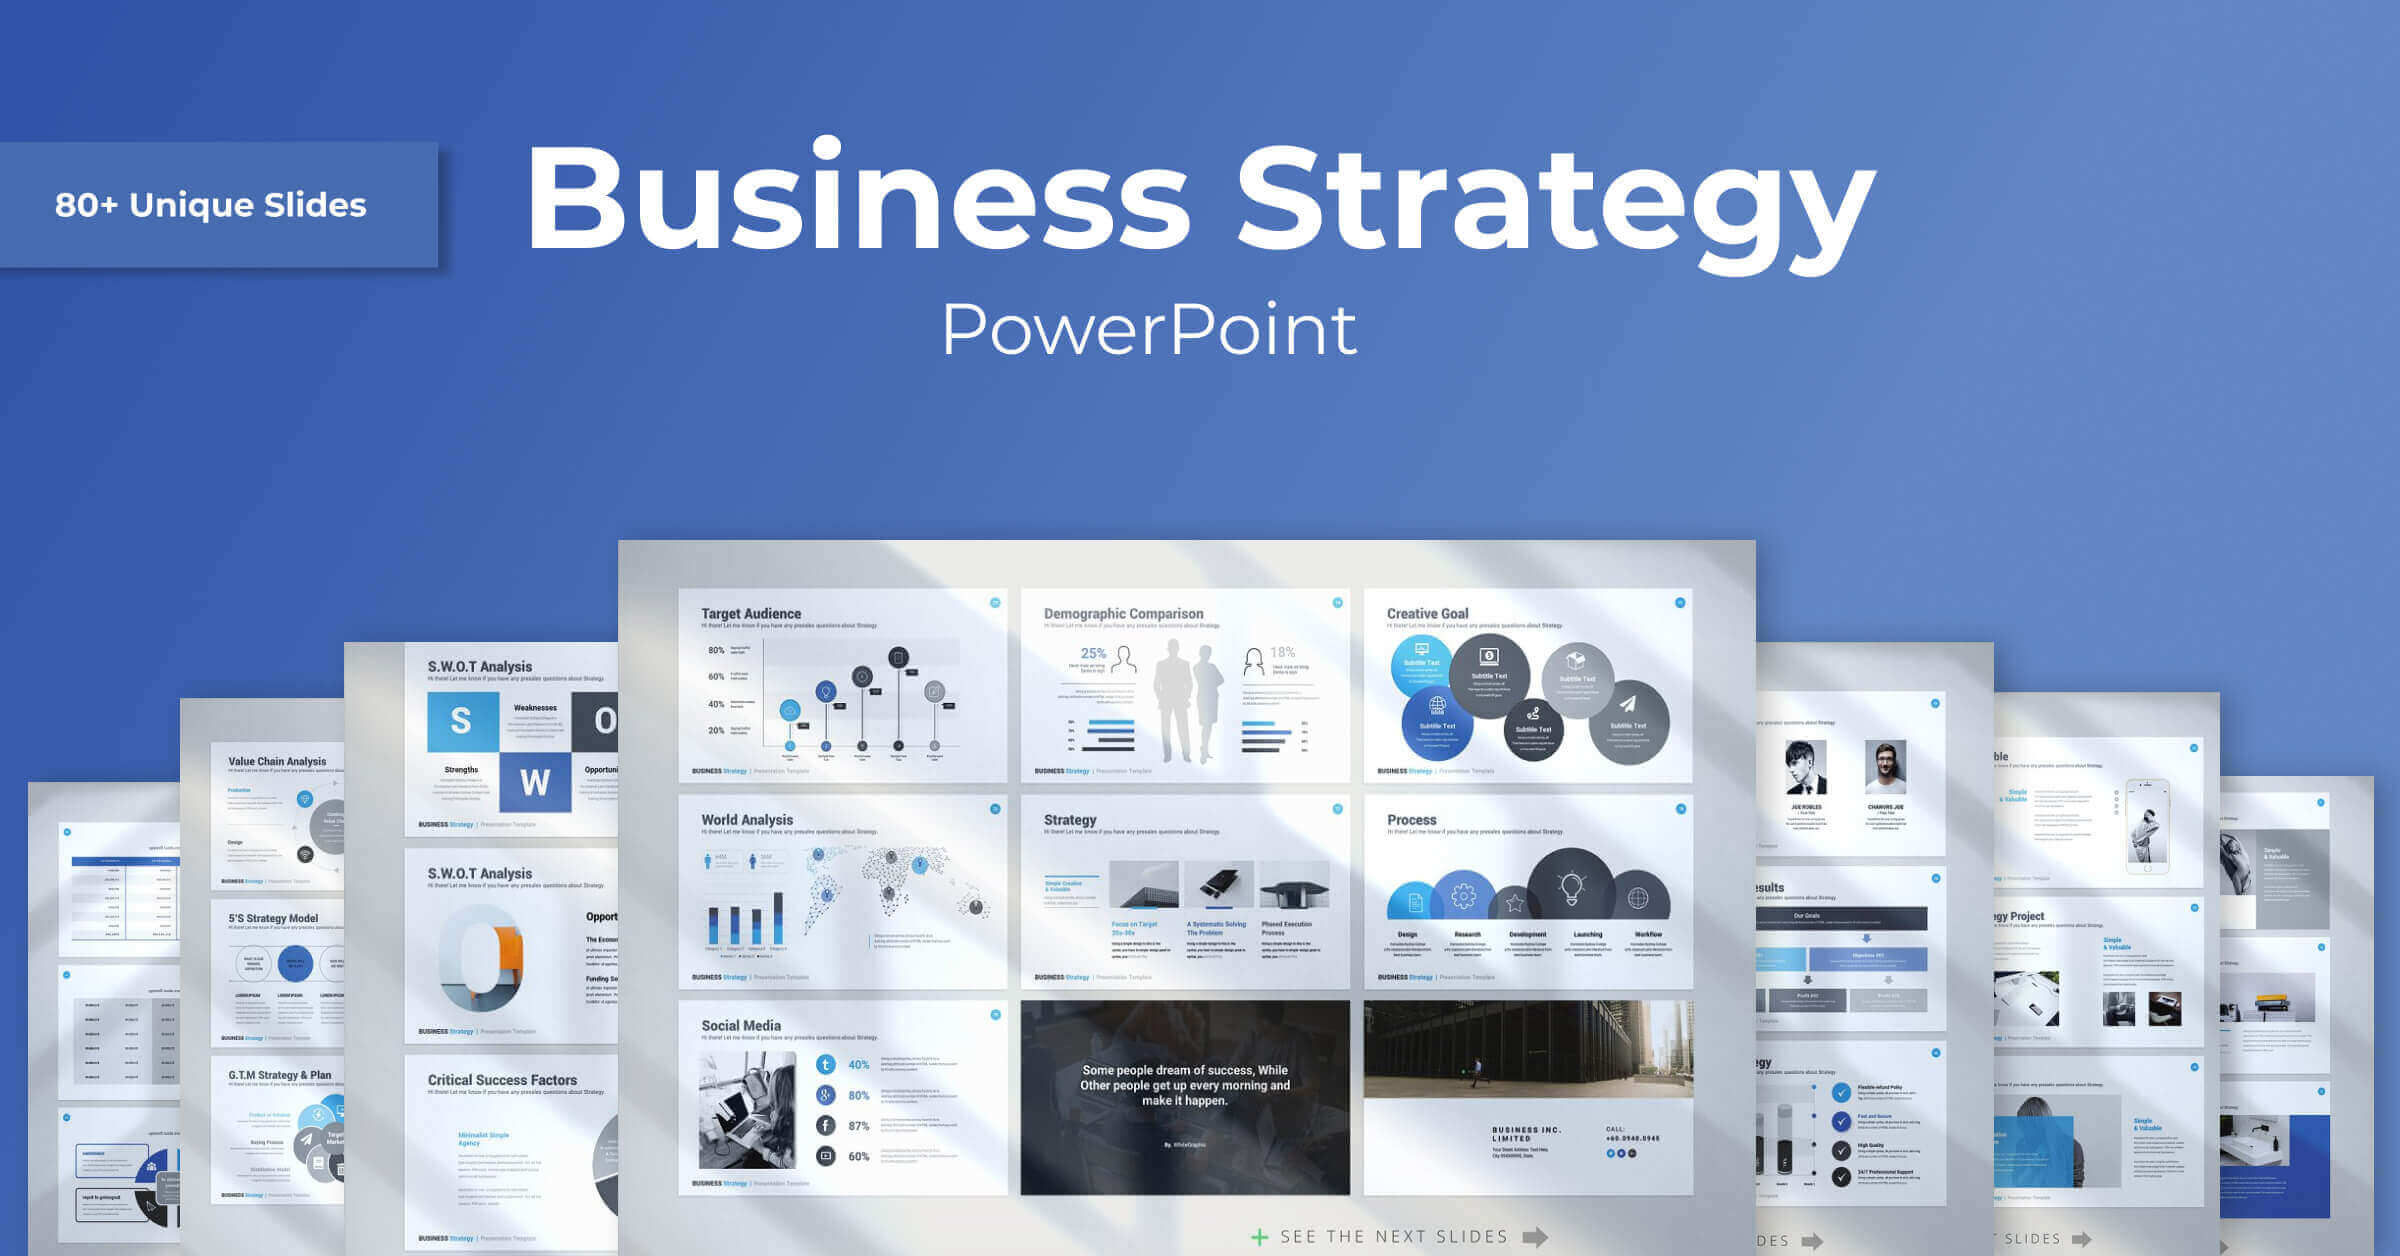 Many Slides of Business Strategy Powerpoint.